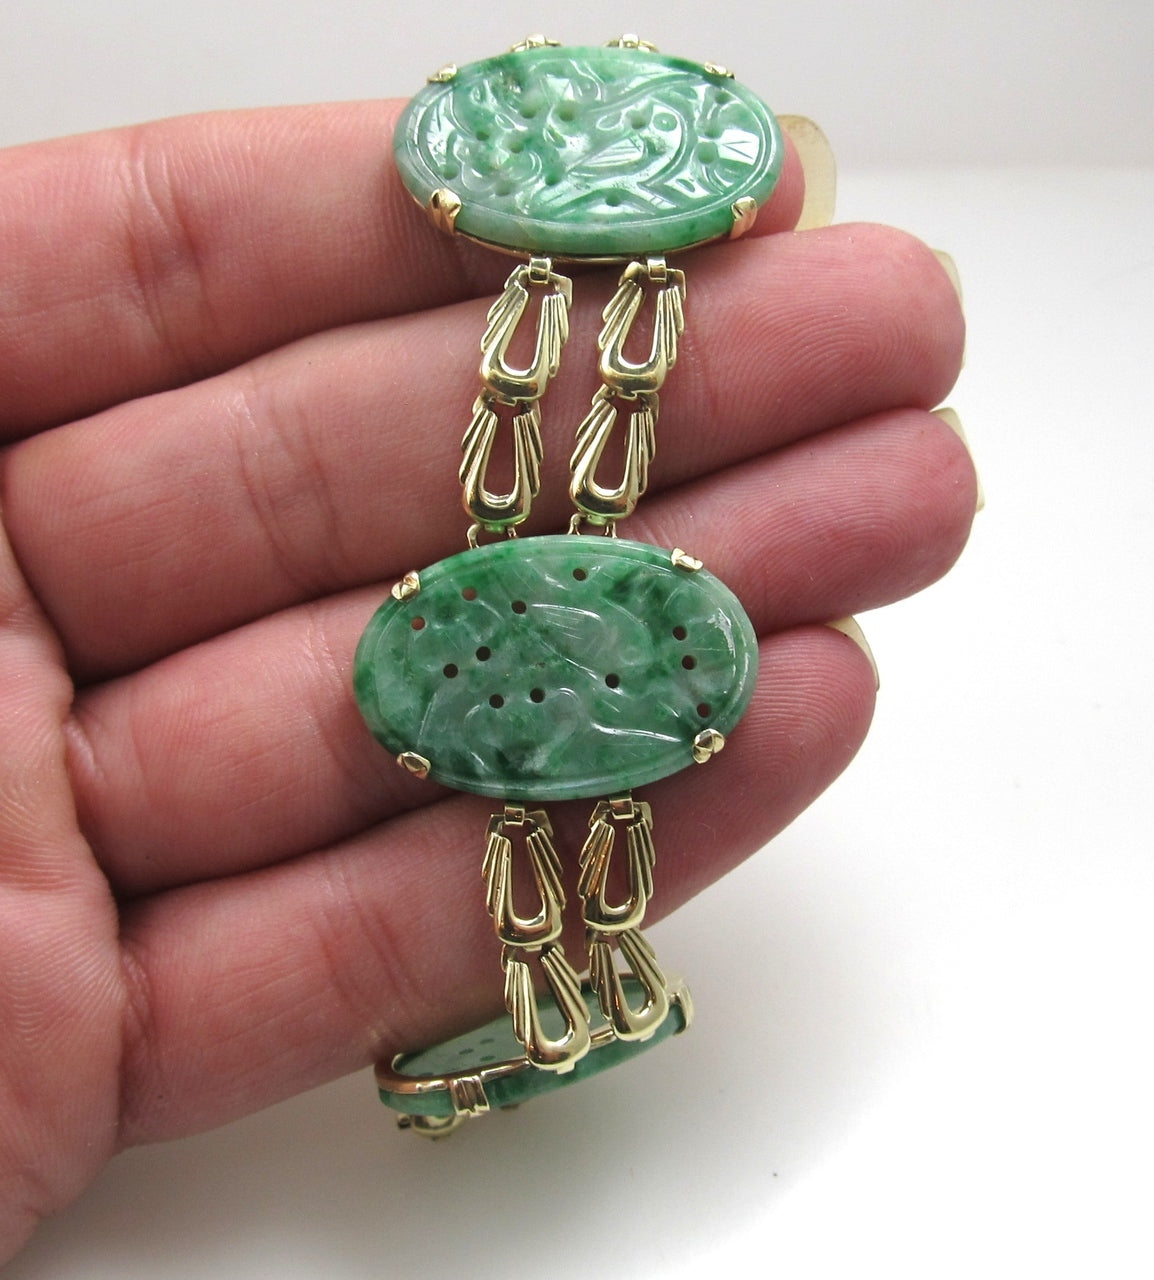 Vintage 14k Yellow Gold Bracelet With Carved Jade, Circa 1920